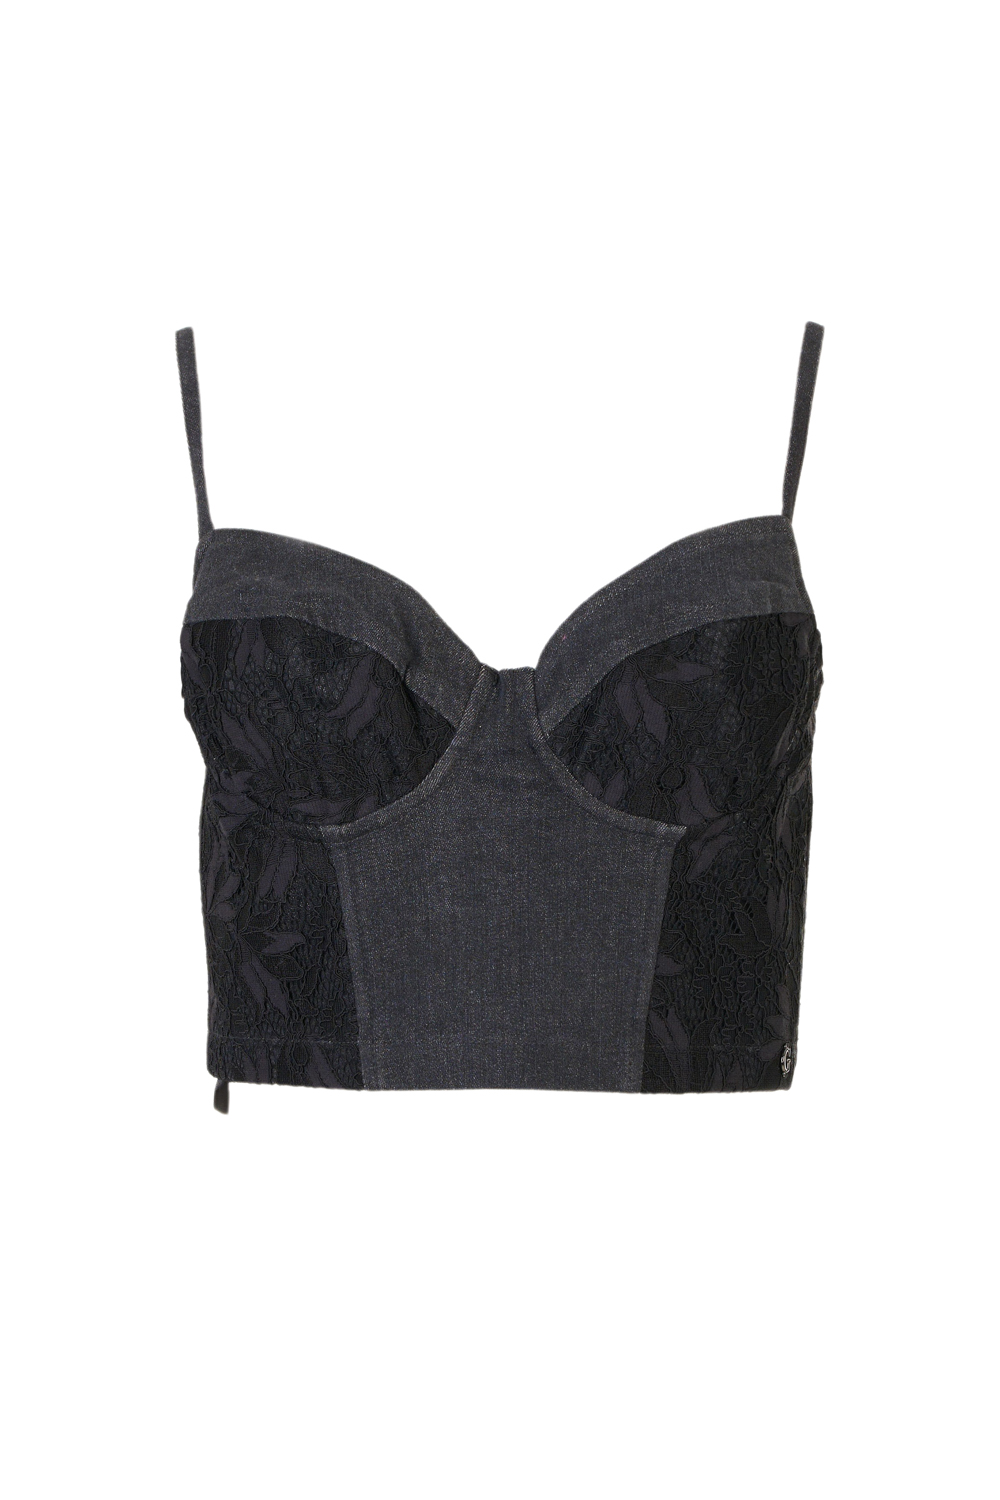 Lace and Denim Lingerie Style Bustier (Guess)